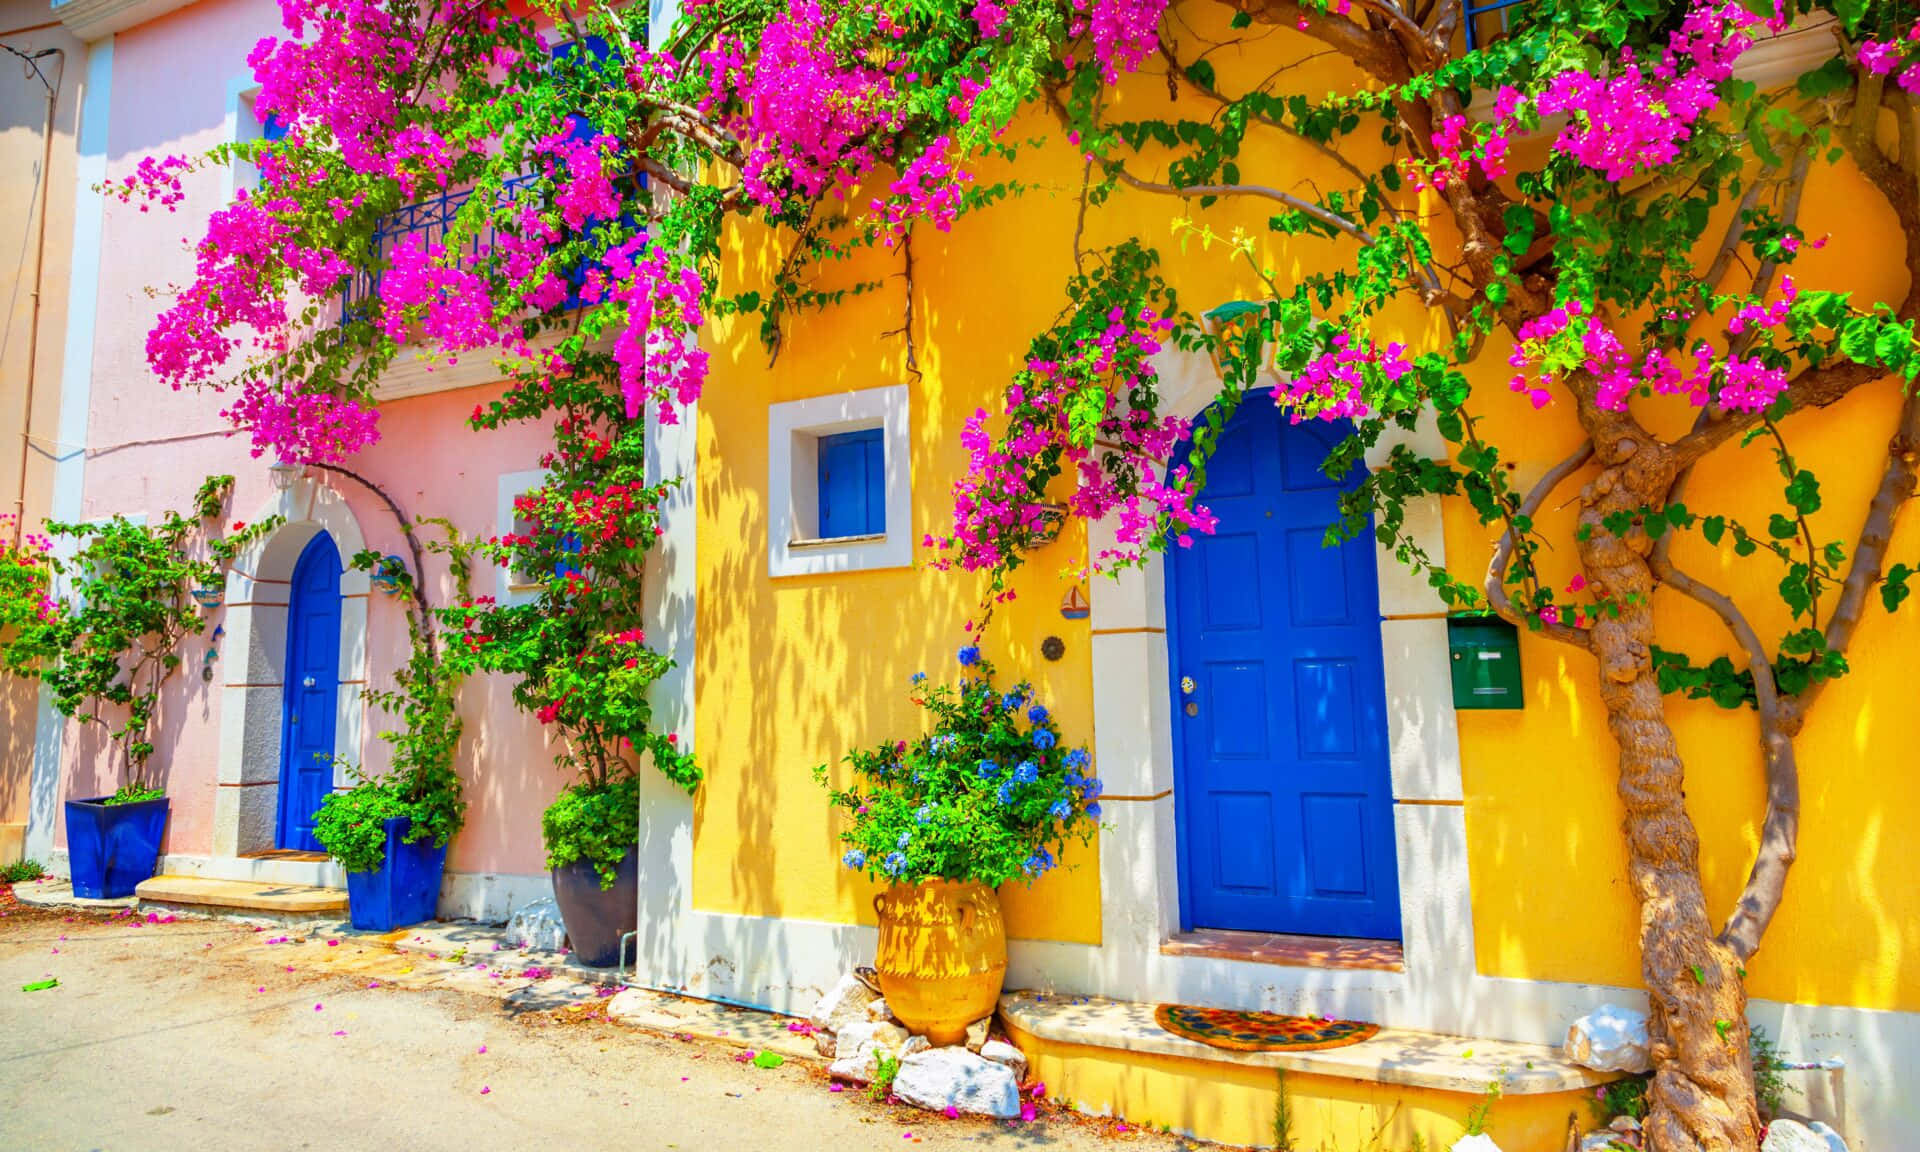 Colorful Houses With Flowers And Blue Doors